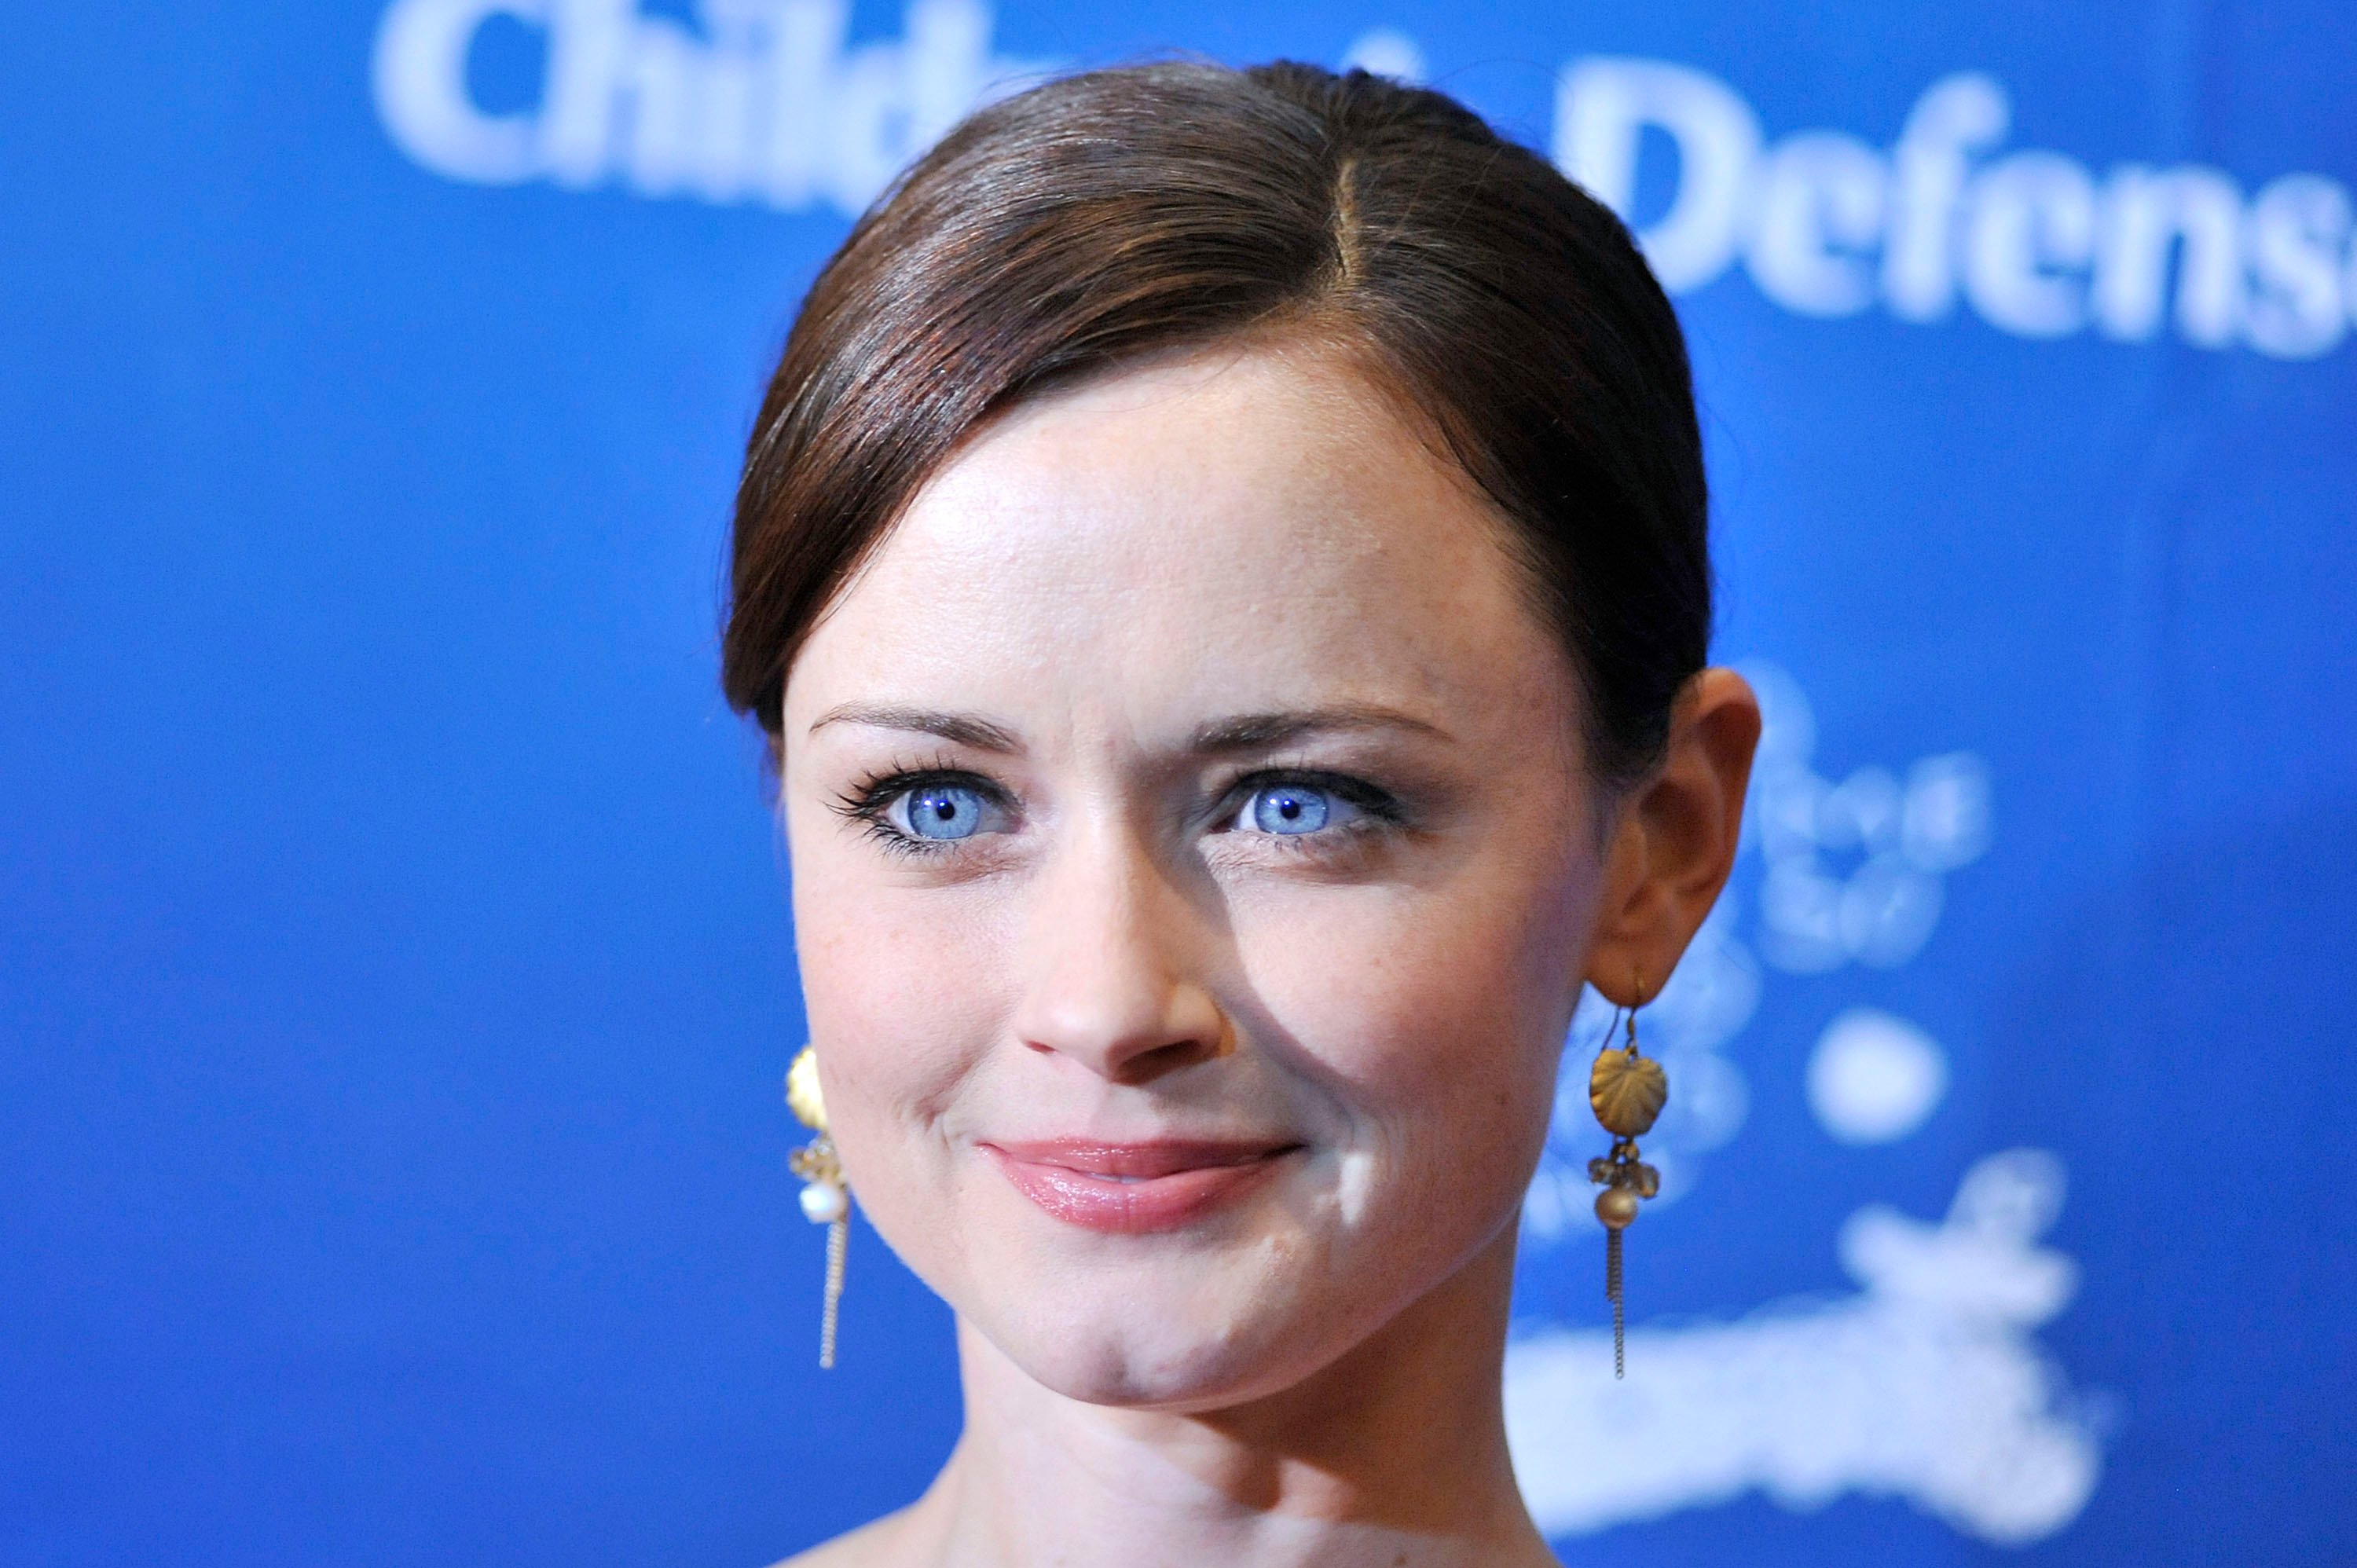 Alexis Bledel arrives for the Children's Defense Fund-California 22nd Annual "Beat the Odds" Awards at Beverly Hills Hotel on December 6, 2012 